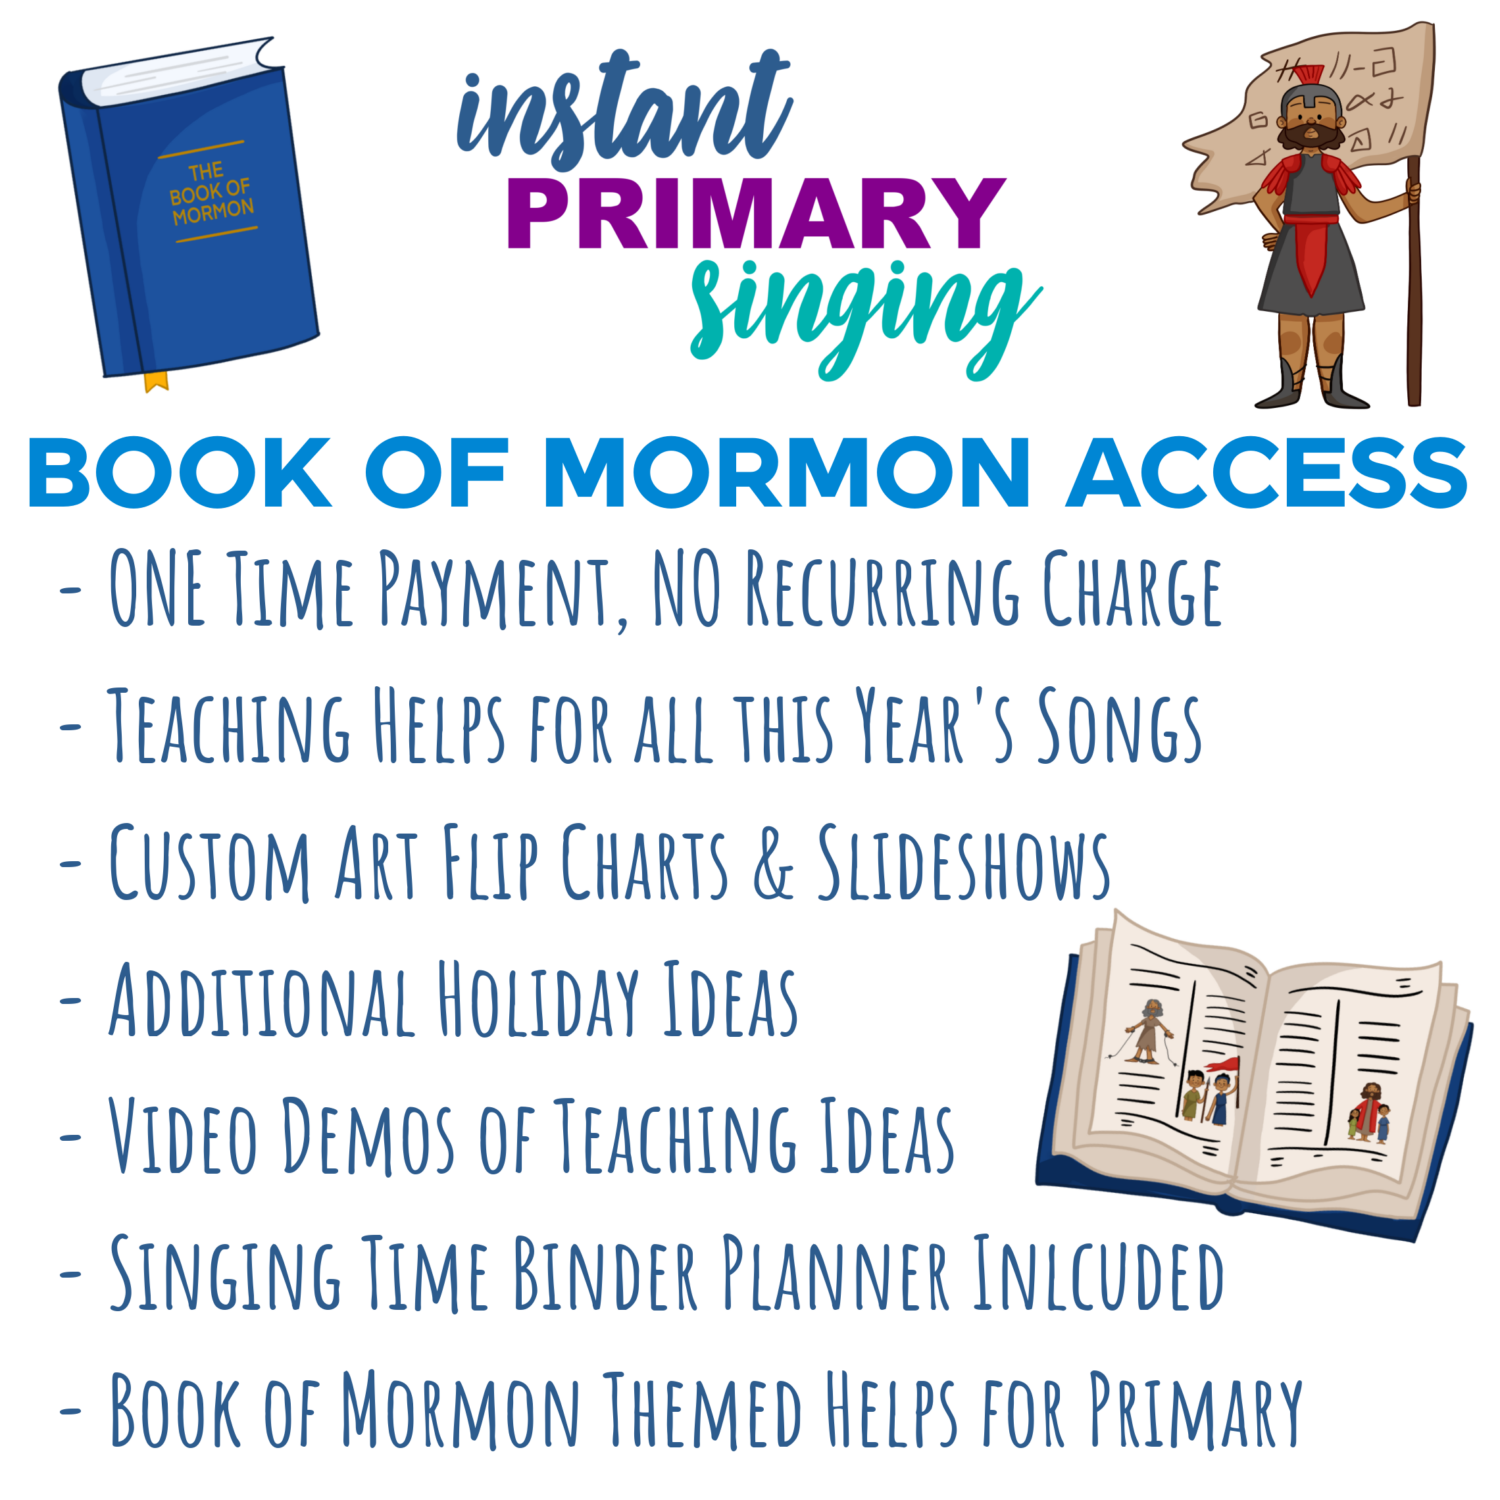 INSTANT Primary Singing Book of Mormon Access Packet - Includes teaching ideas for ALL of the Come Follow Me songs for the Book of Mormon year including fun singing time ideas for the holidays, custom art flip charts, Book of Mormon year themed helps, even bonus planners and teaching demo videos! Everything you need to help you be successful as an LDS Primary Music Leader!